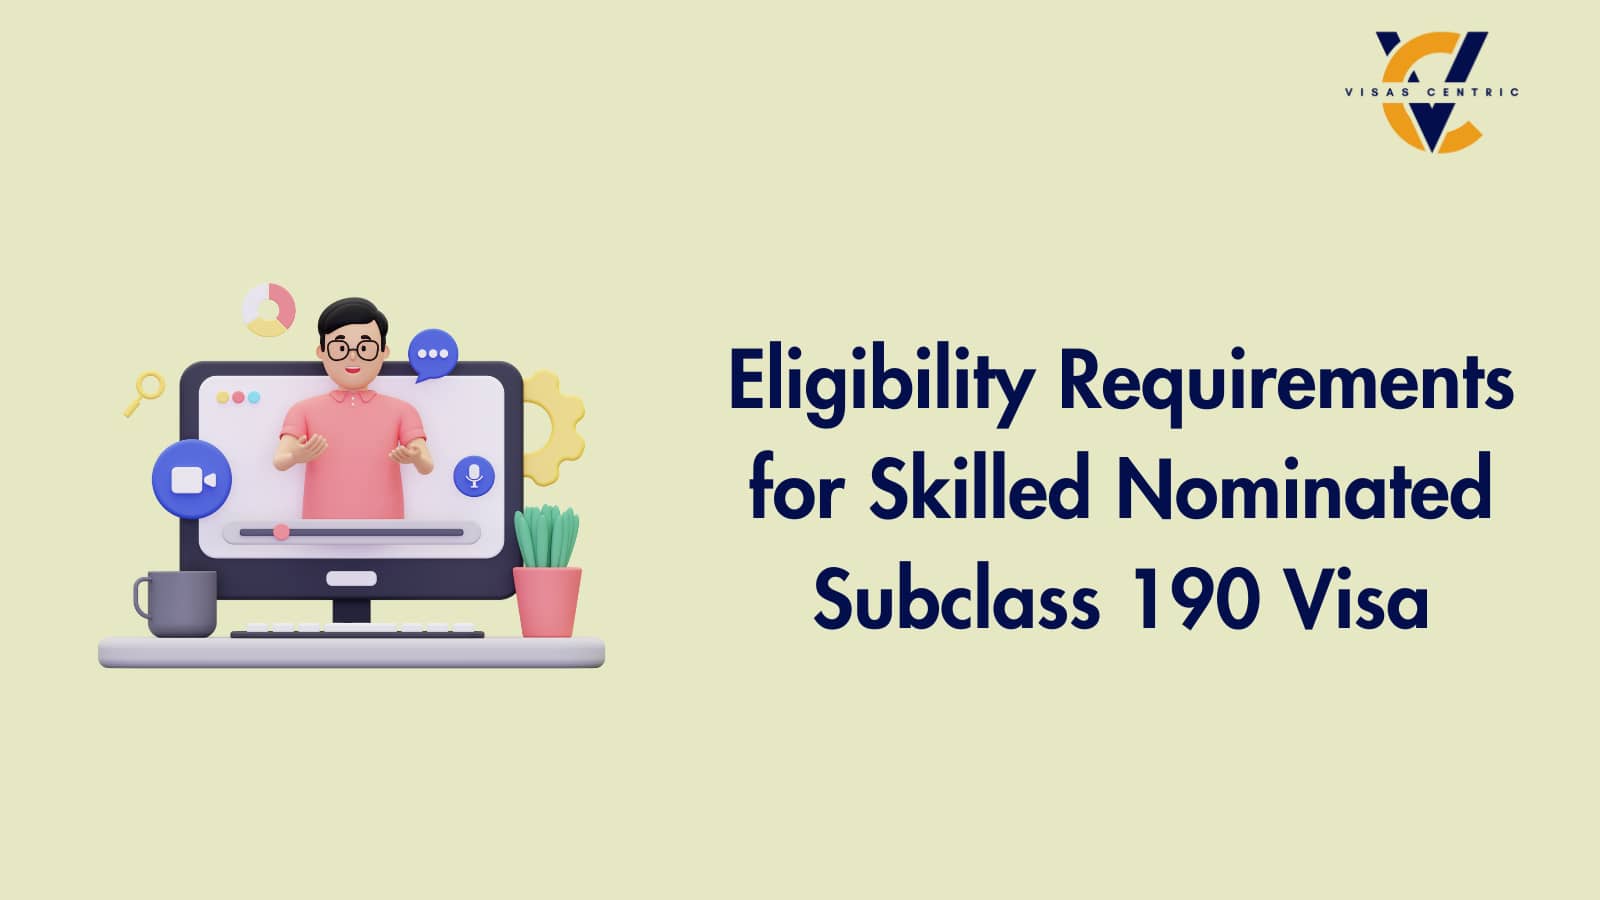 Eligibility Requirements for Skilled Nominated Subclass 190 Visa